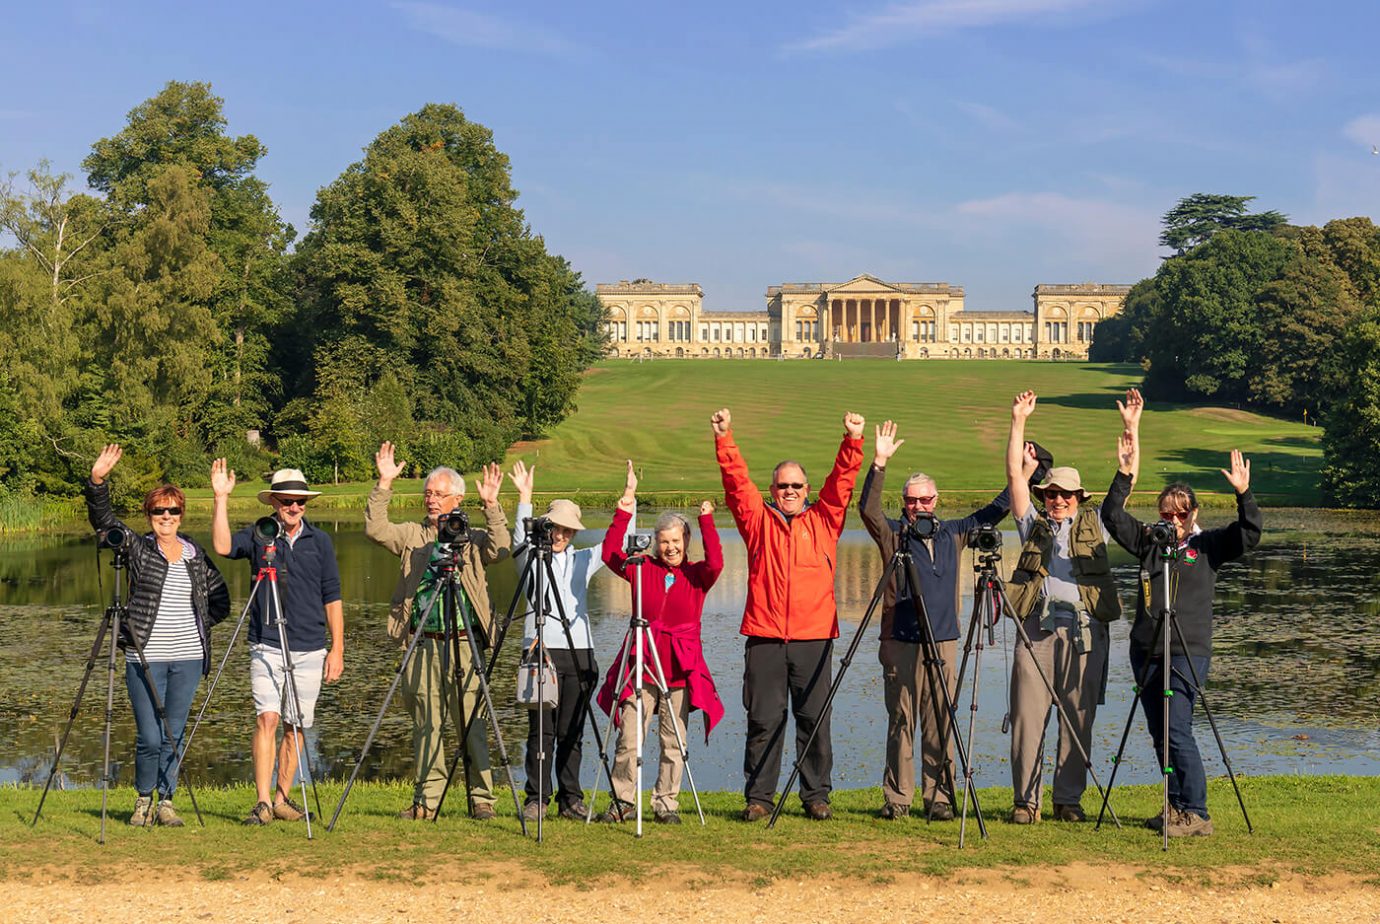 Melvin Nicholson Photography Workshops Attendees, Stowe House, Stowe National Trust